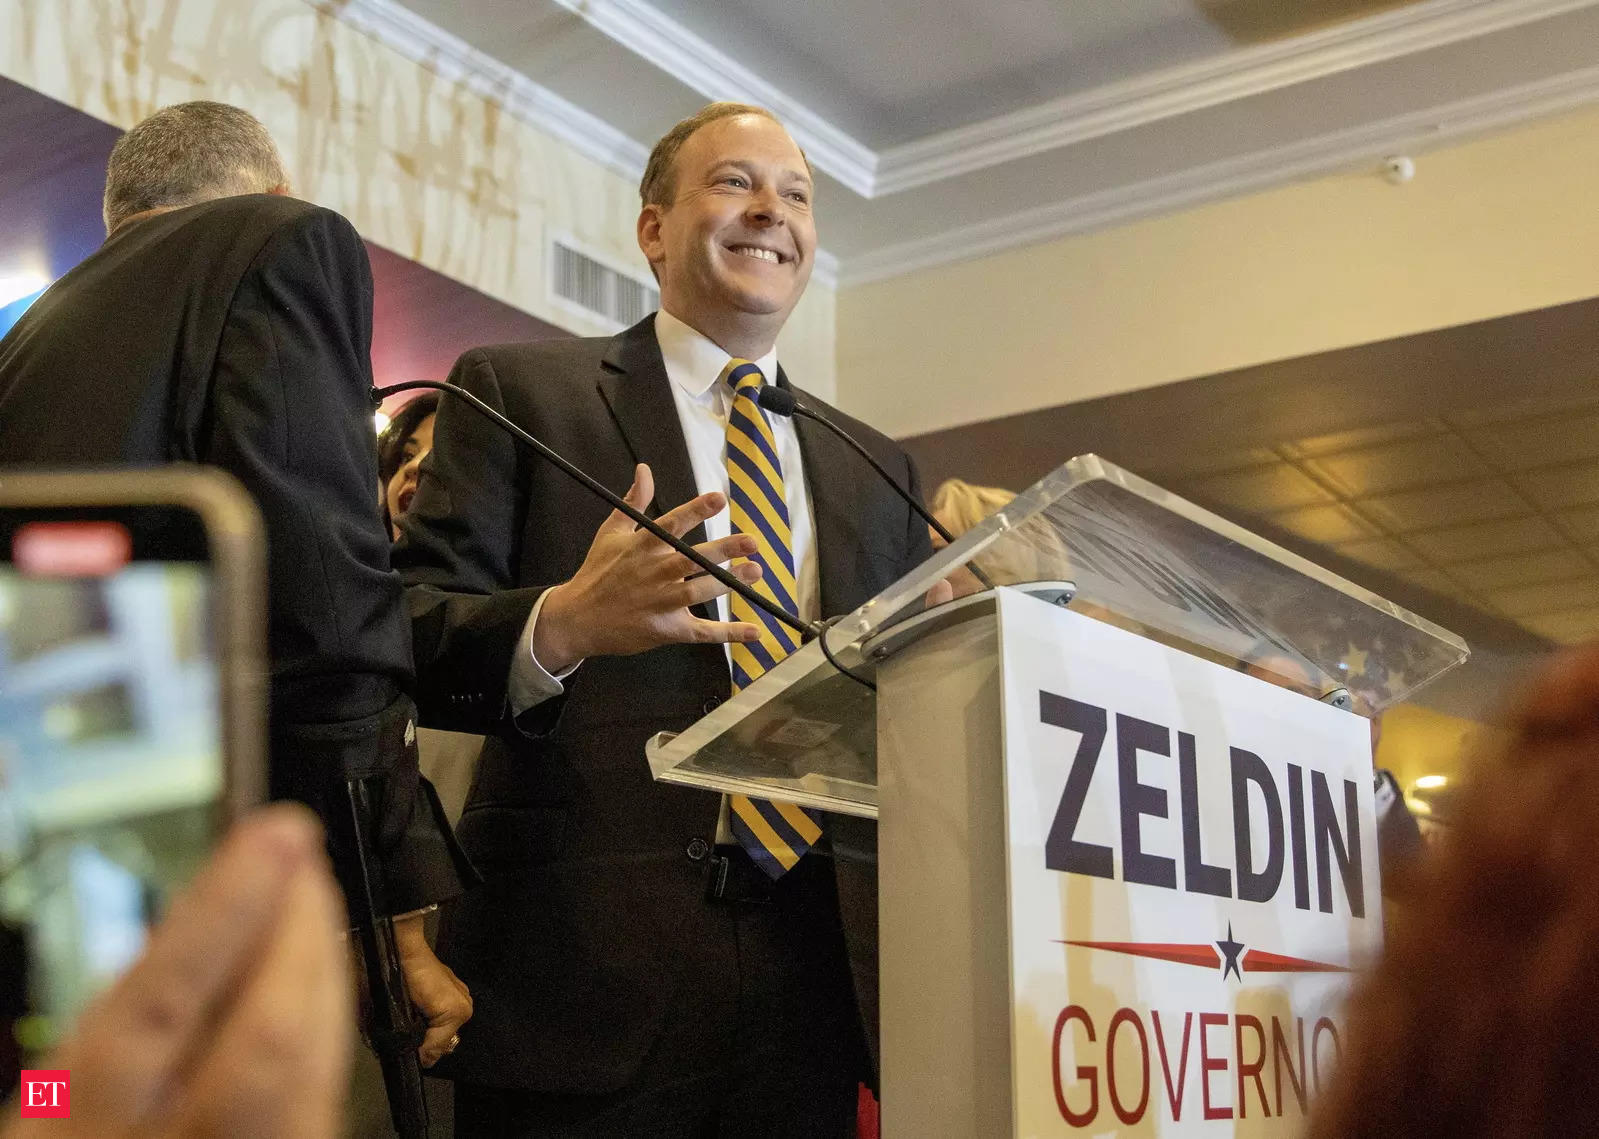 lee zeldin: Why the odds are in favour of NY Republican nominee Lee Zeldin  - The Economic Times